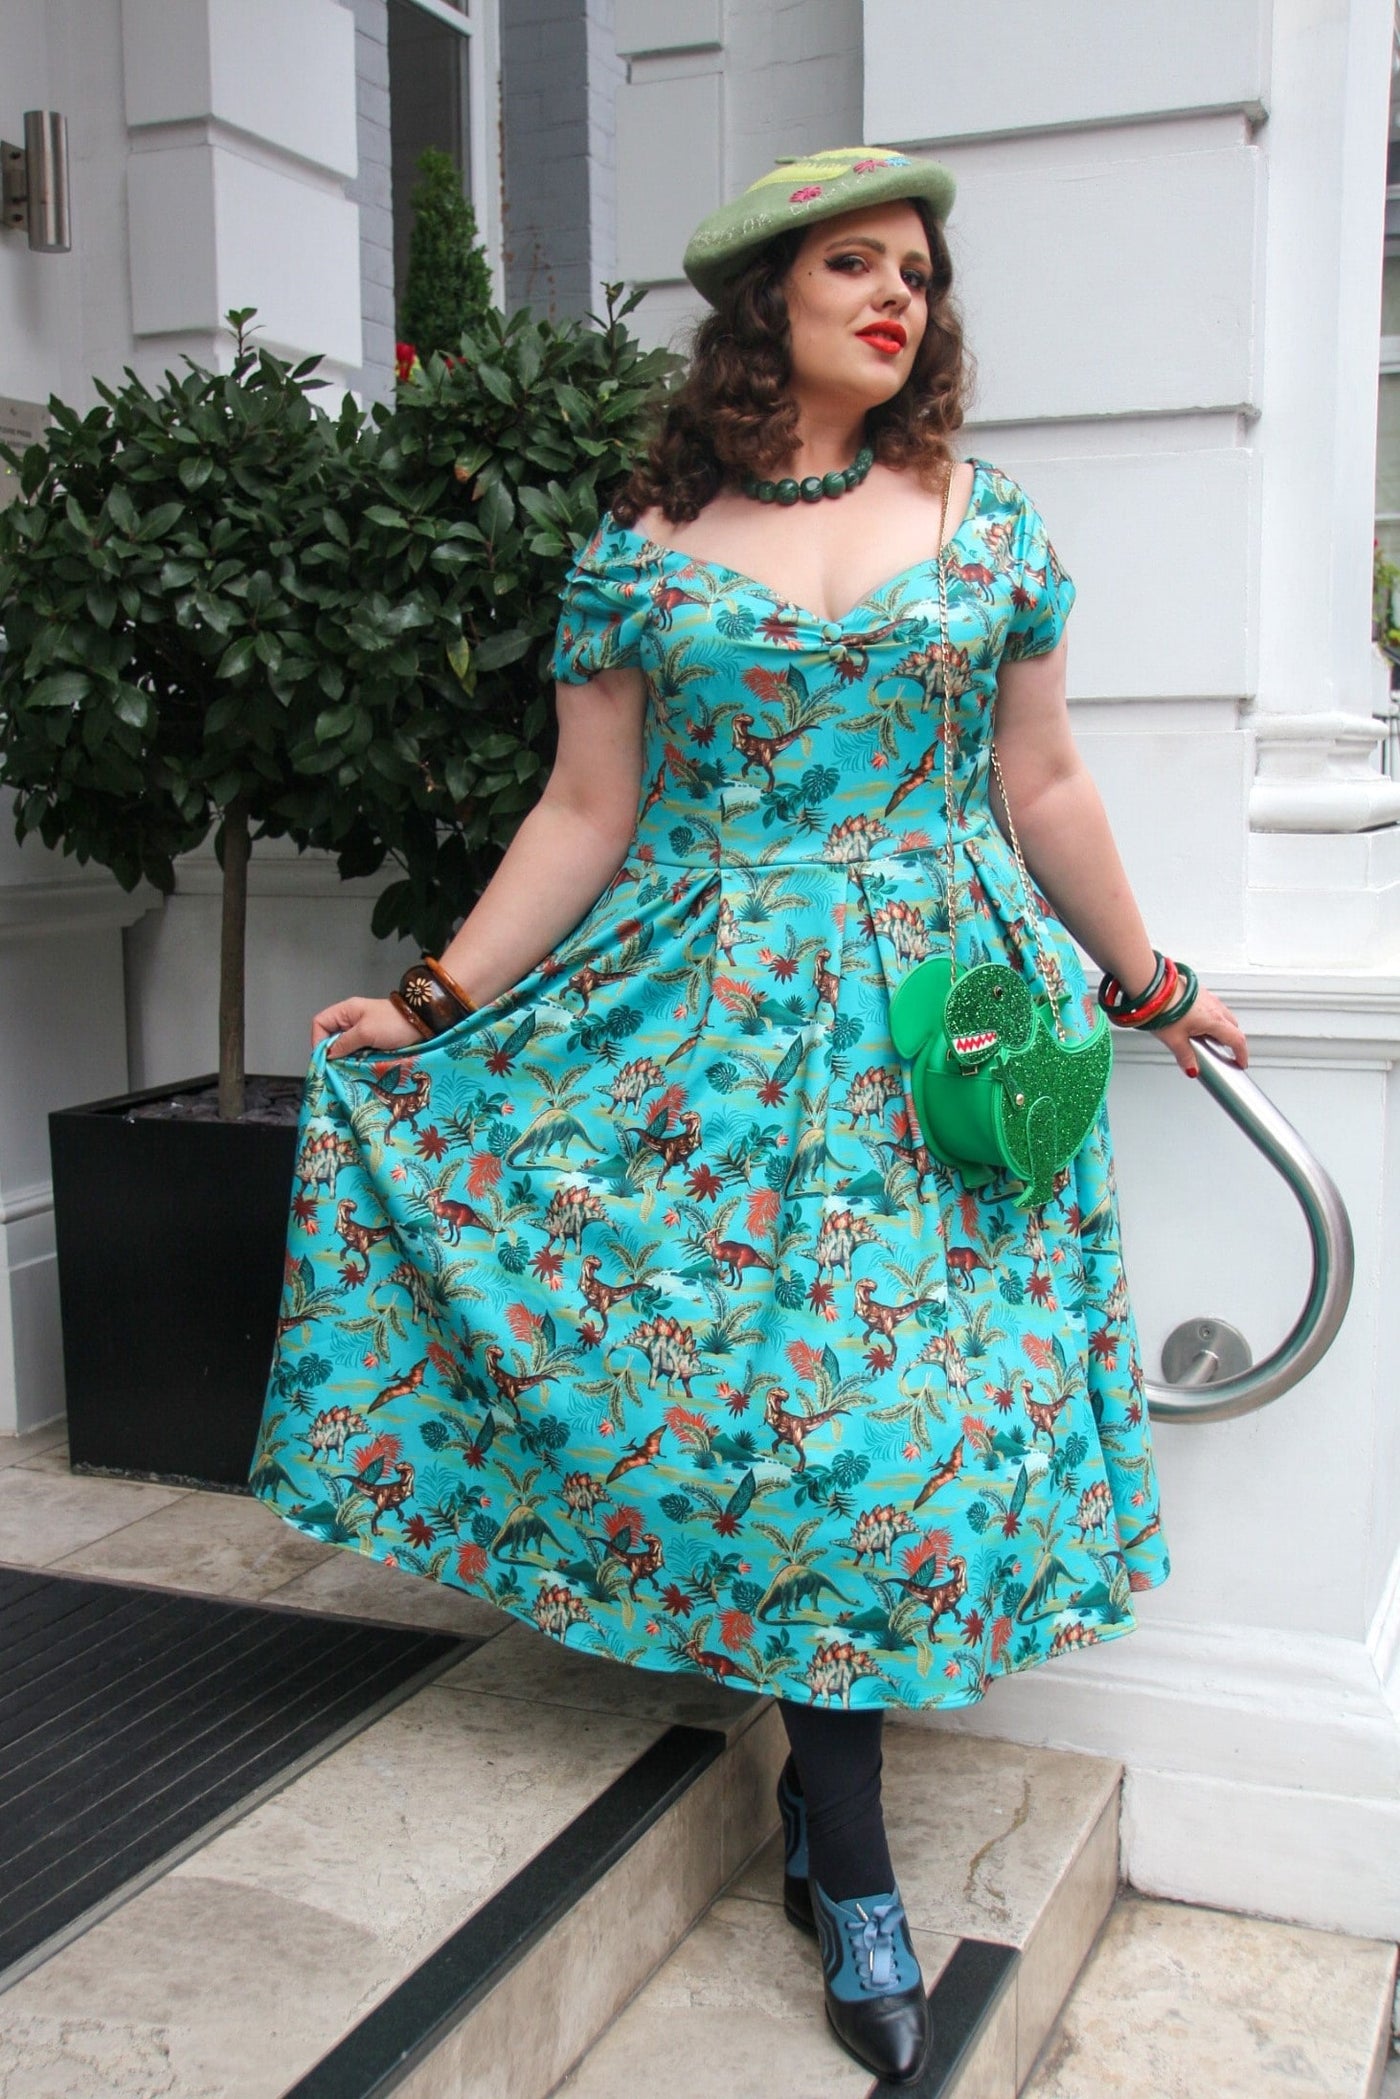 loisjelise wearing Vintage Forest Dinosaur T Rex Dress With Pockets In Green for dinosaur theme party